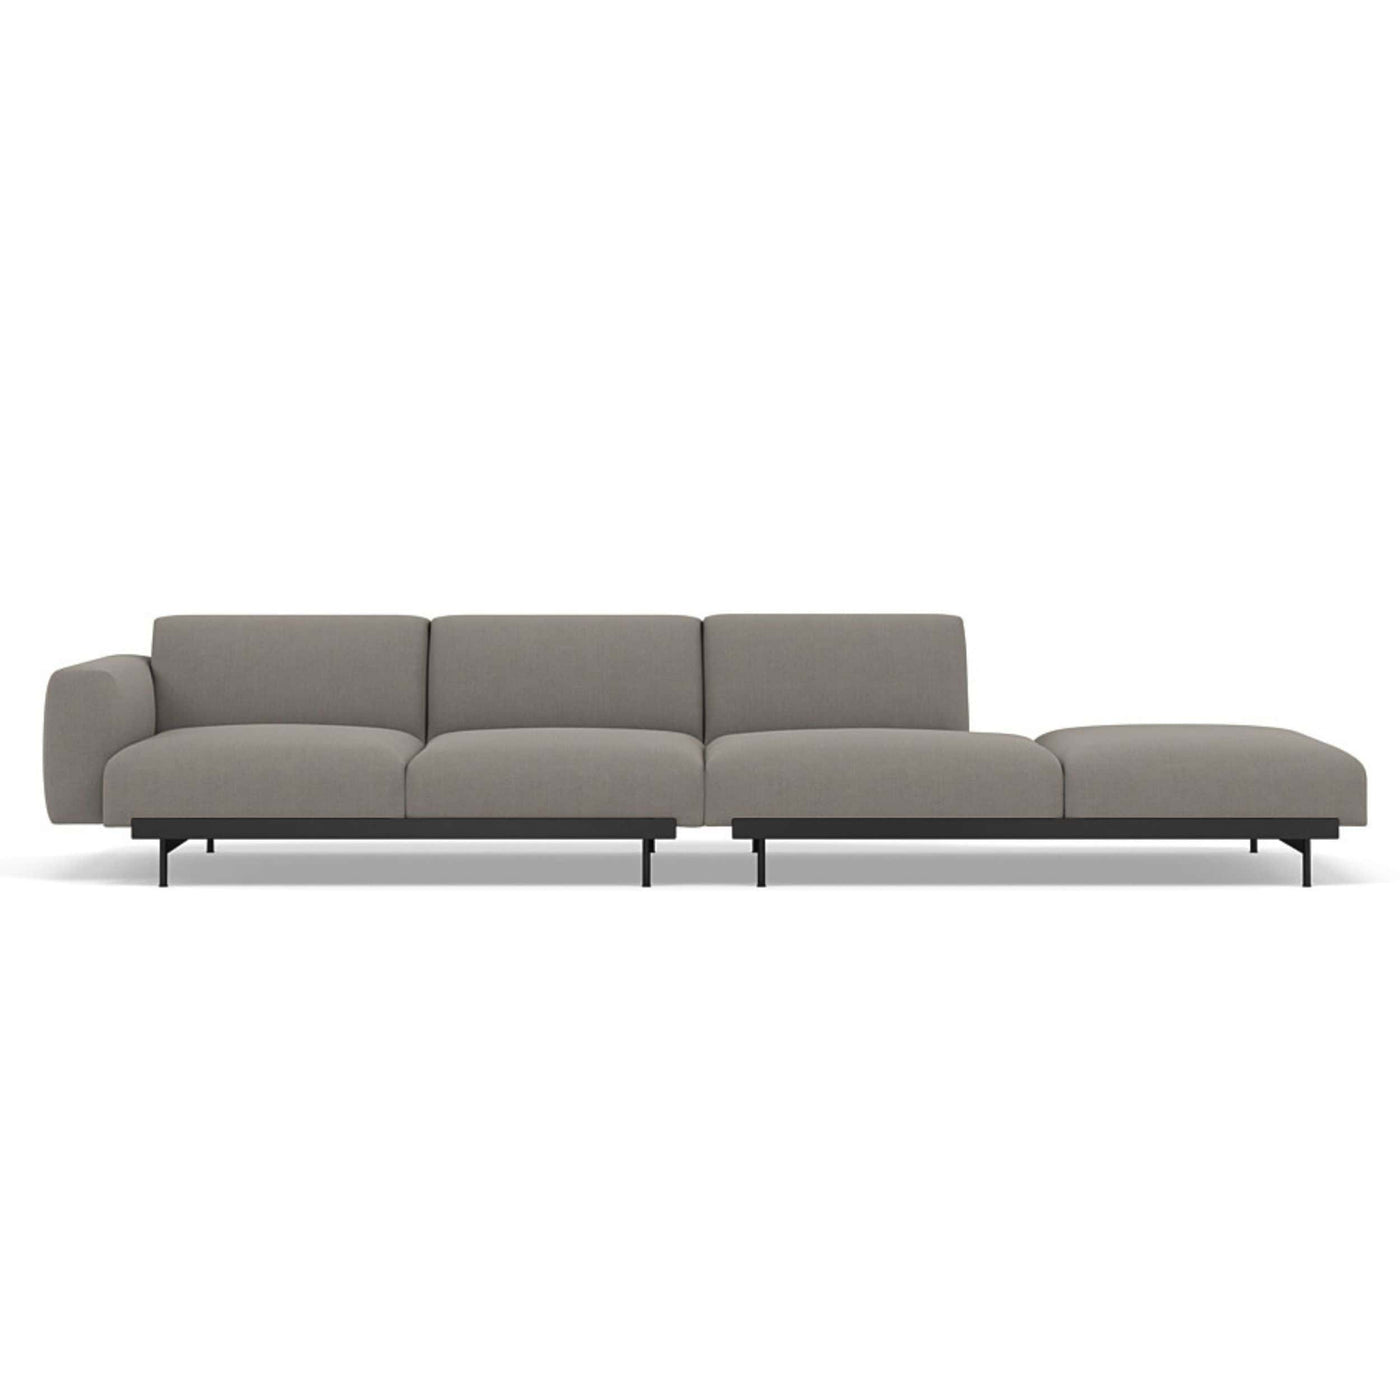 Muuto In Situ Modular 4 Seater Sofa configuration 2 in fiord 262. Made to order from someday designs. #colour_fiord-262